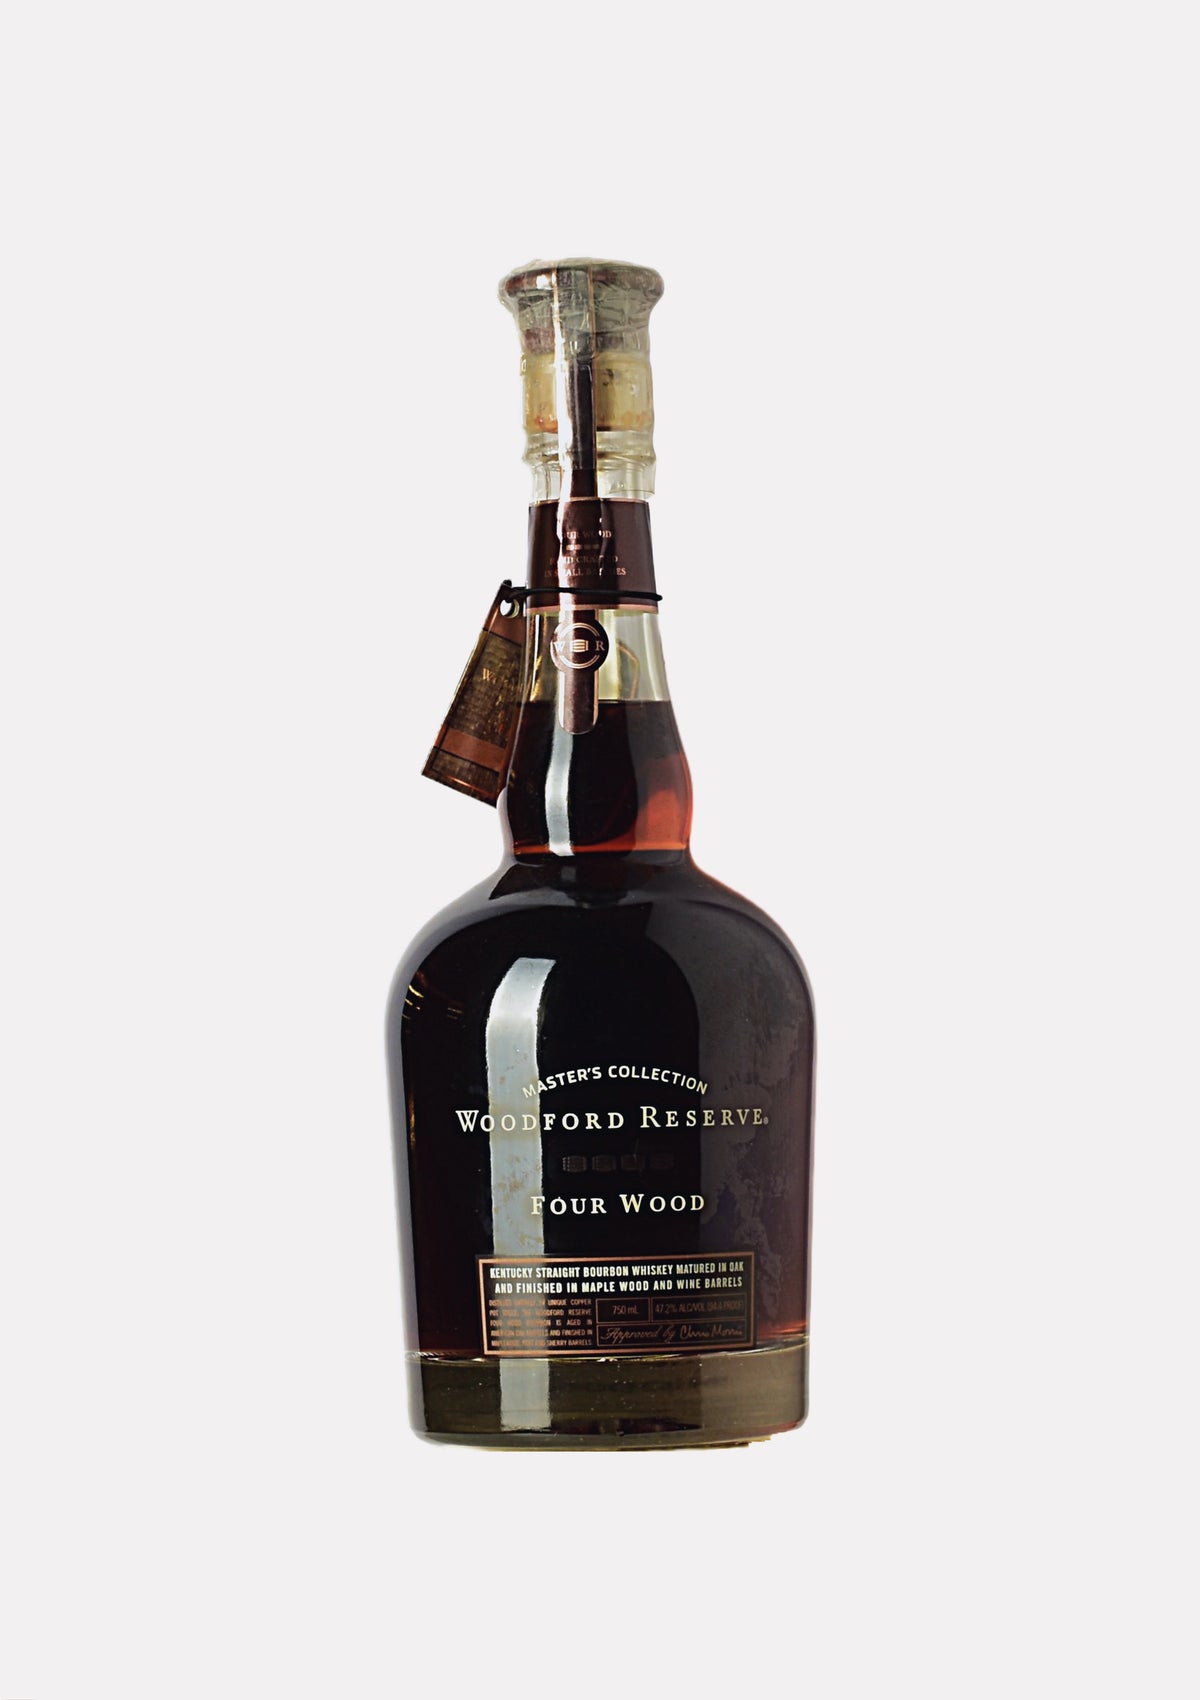 Woodford Reserve Master`s Collection Four Wood